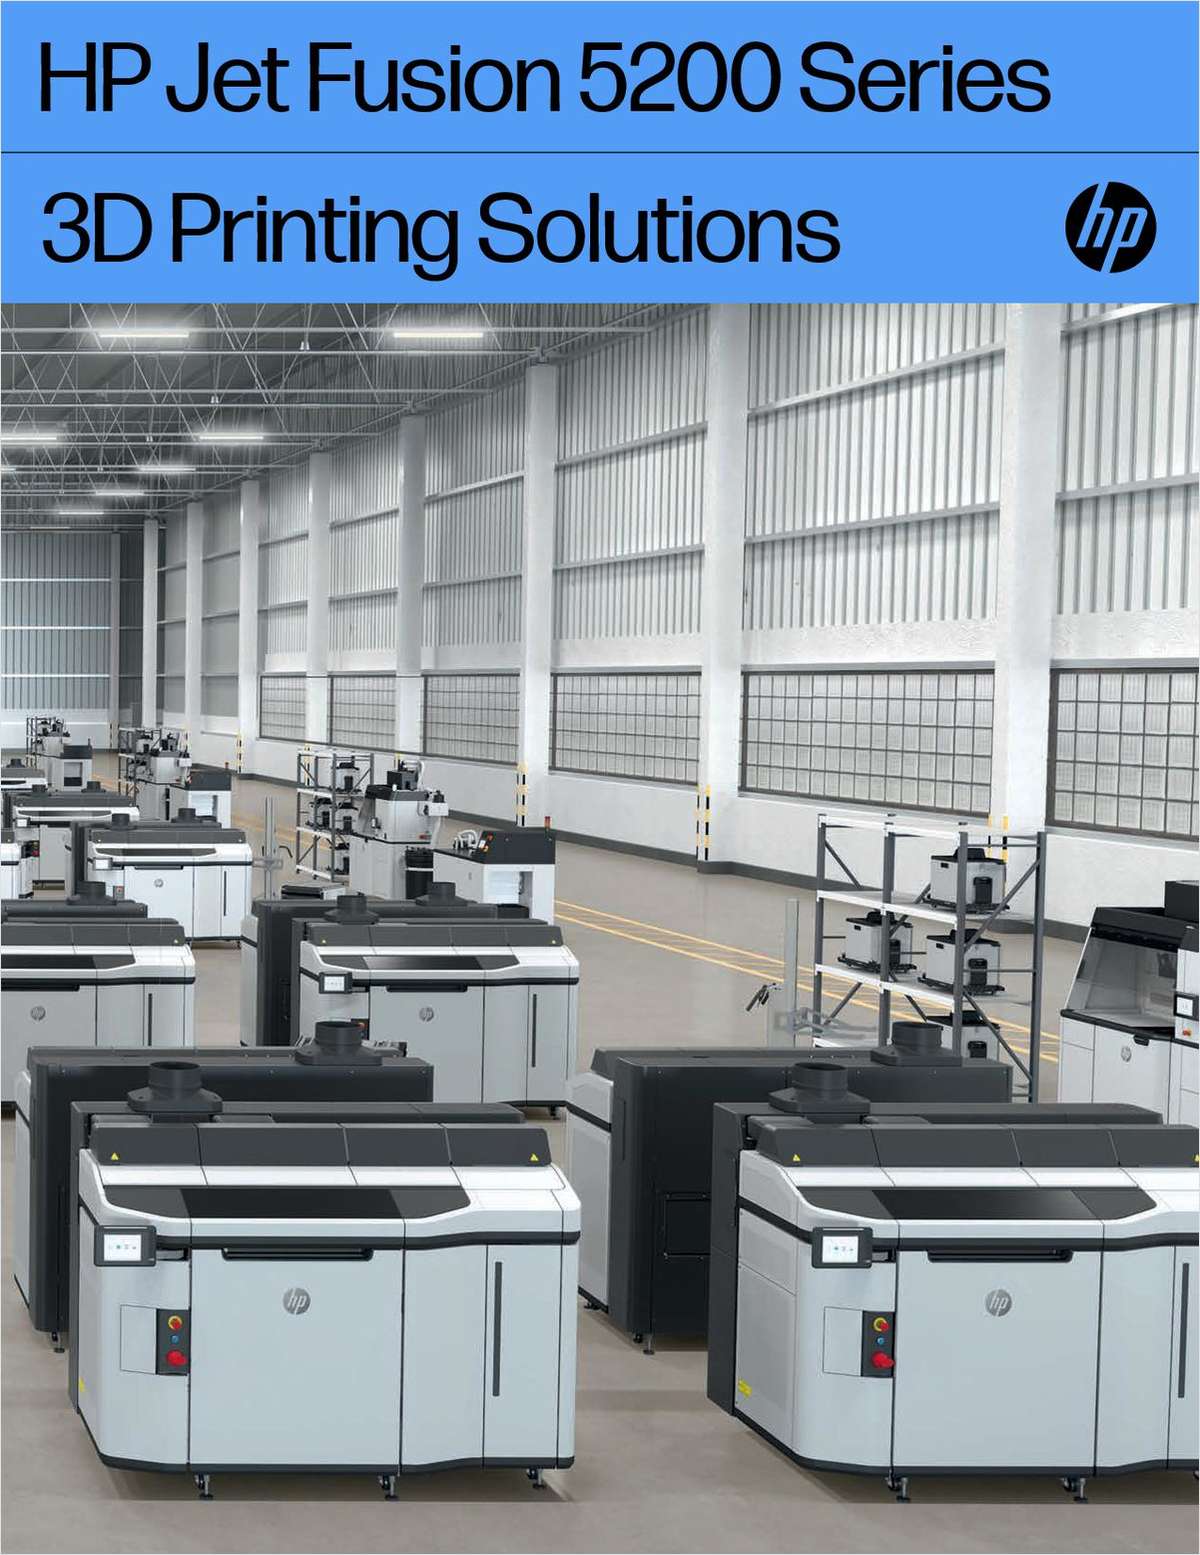 Discover How the HP Industrial 3D Printer Works